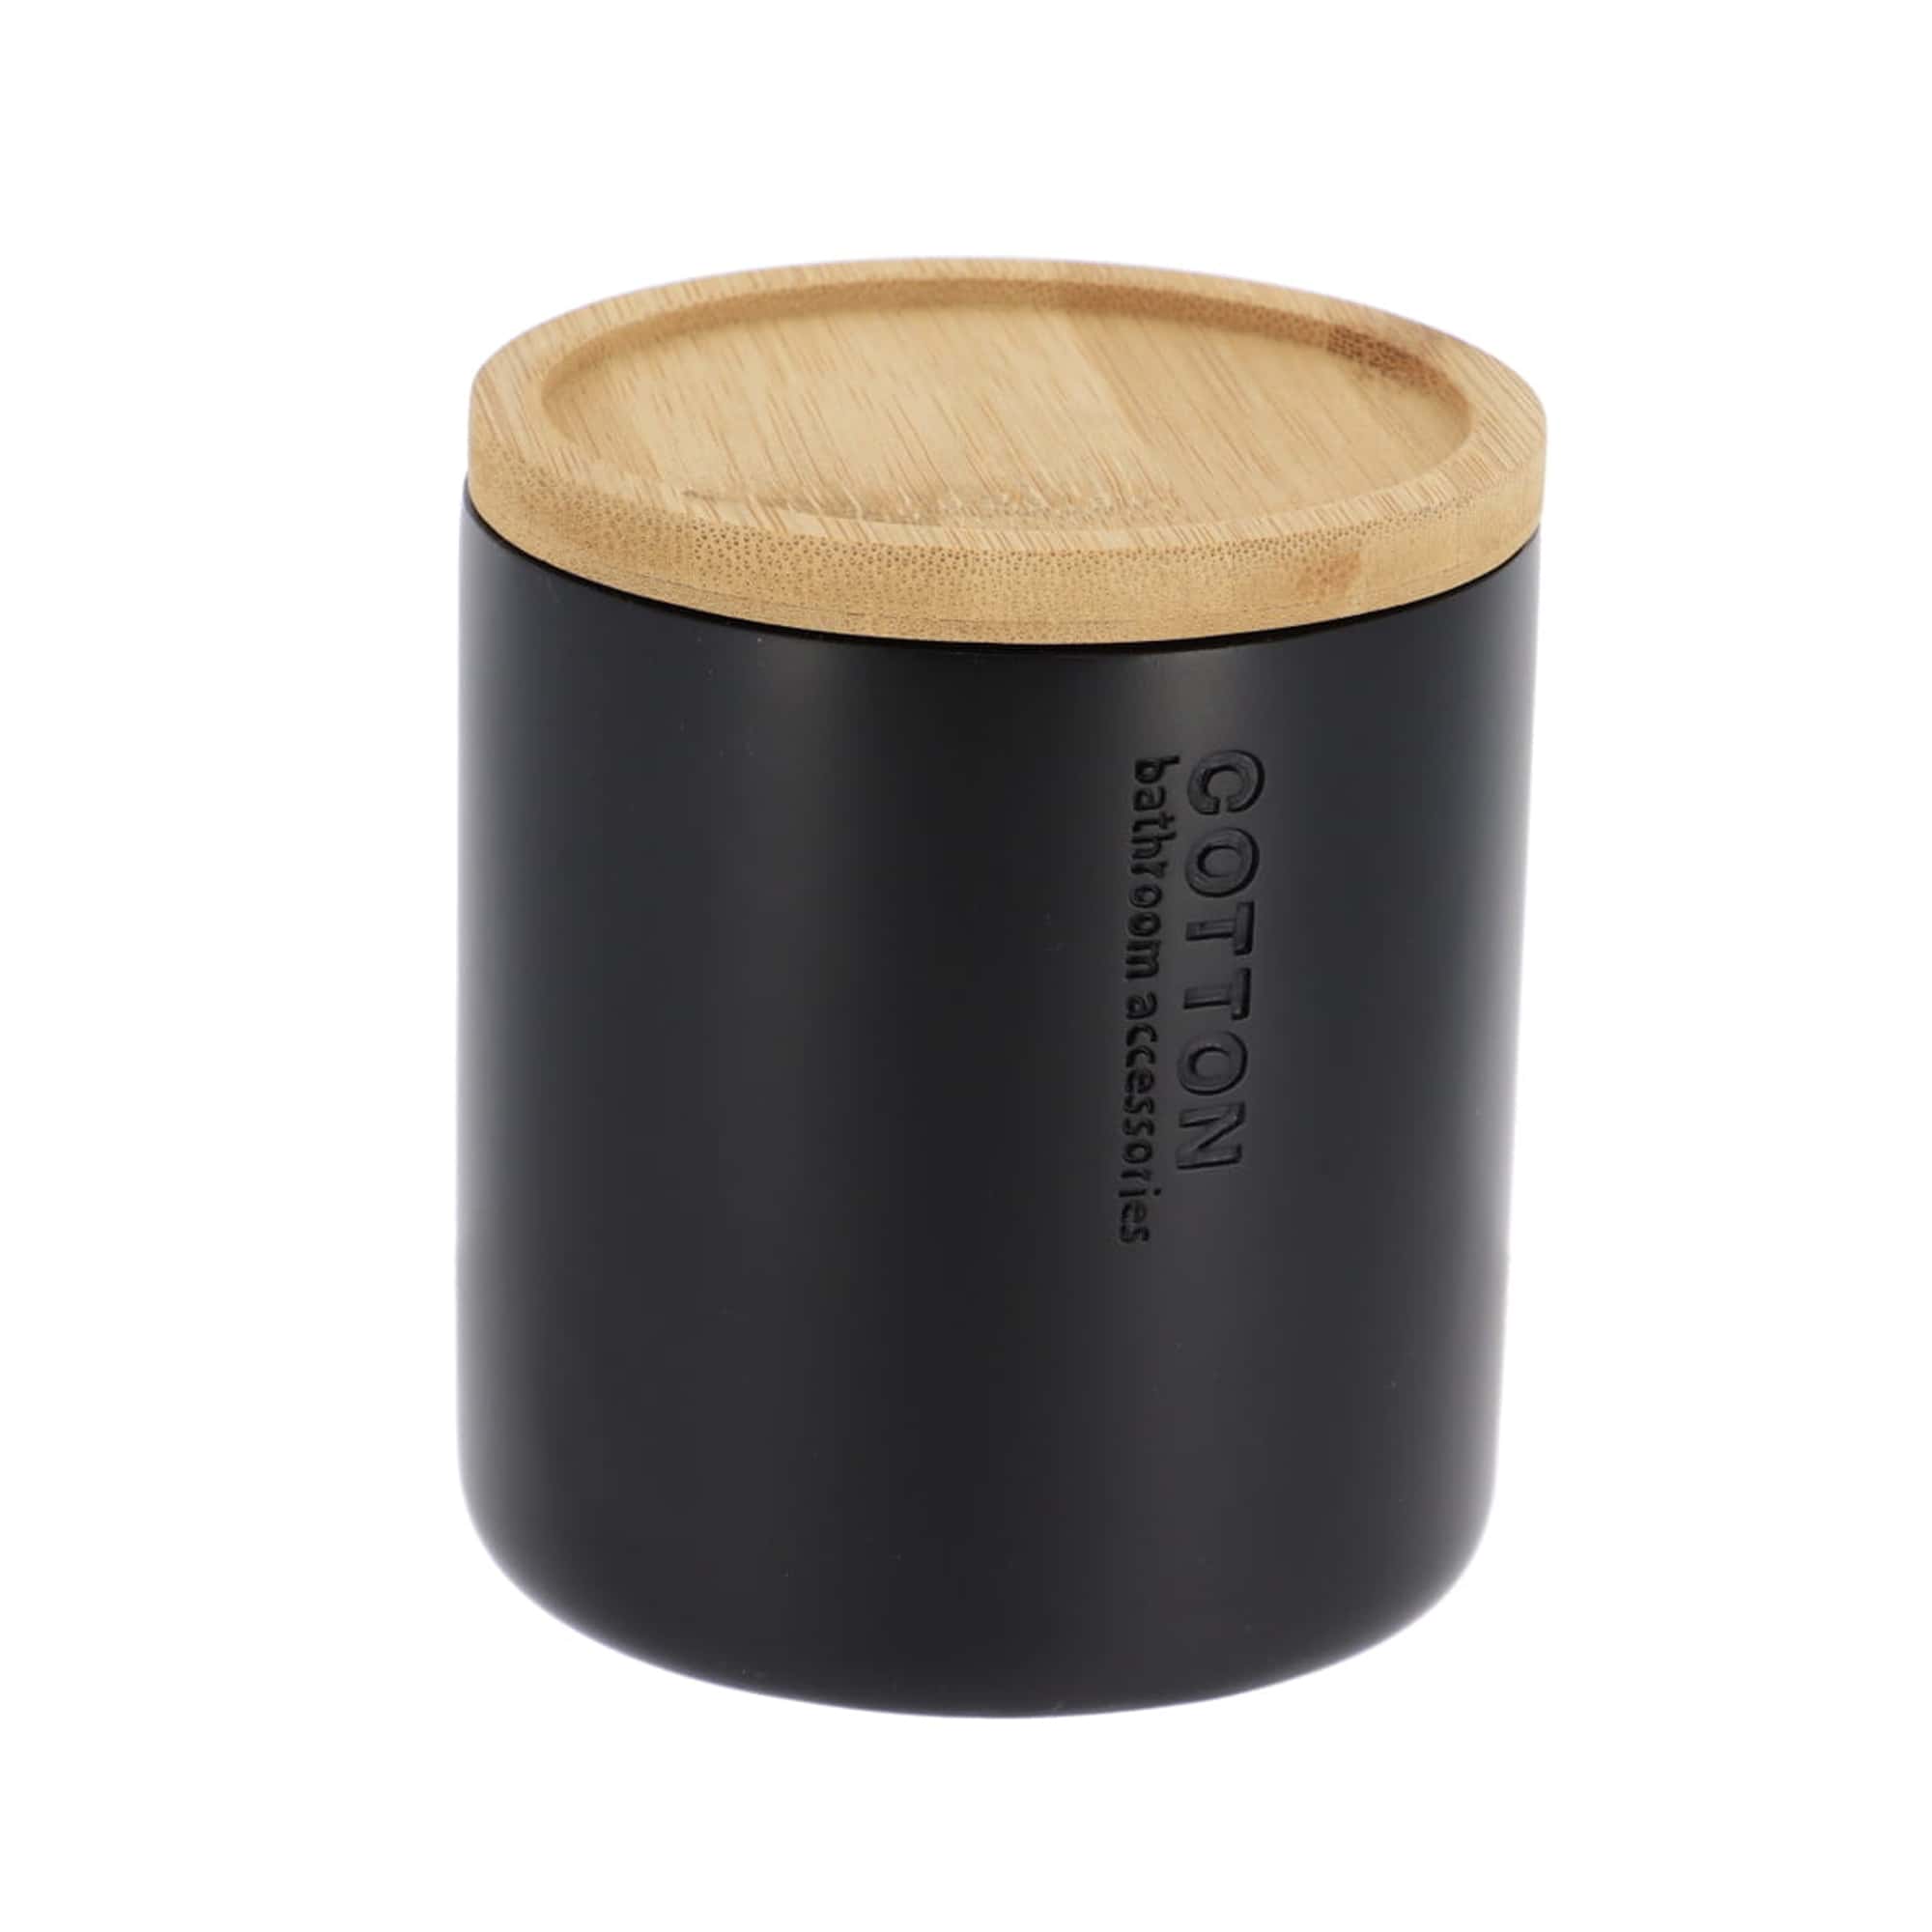 Sleek Matte Black Cotton Swab Holder with Natural Bamboo Lid Polyresin Bathroom Accessory